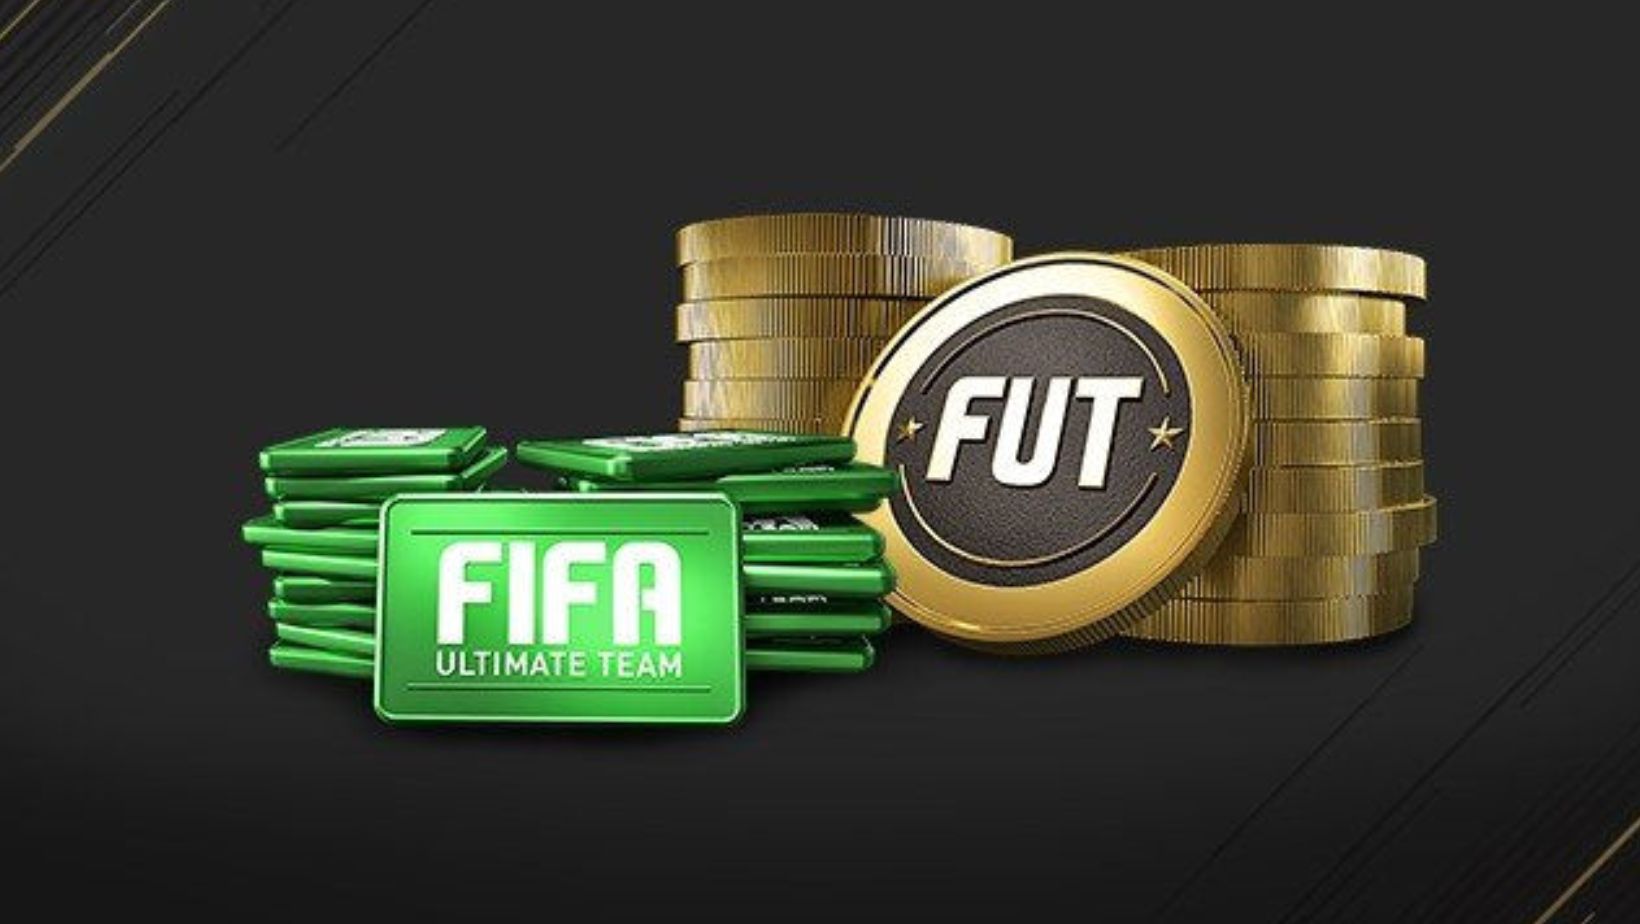 The Beginner’s Guide To Buying Fut Coins Fast